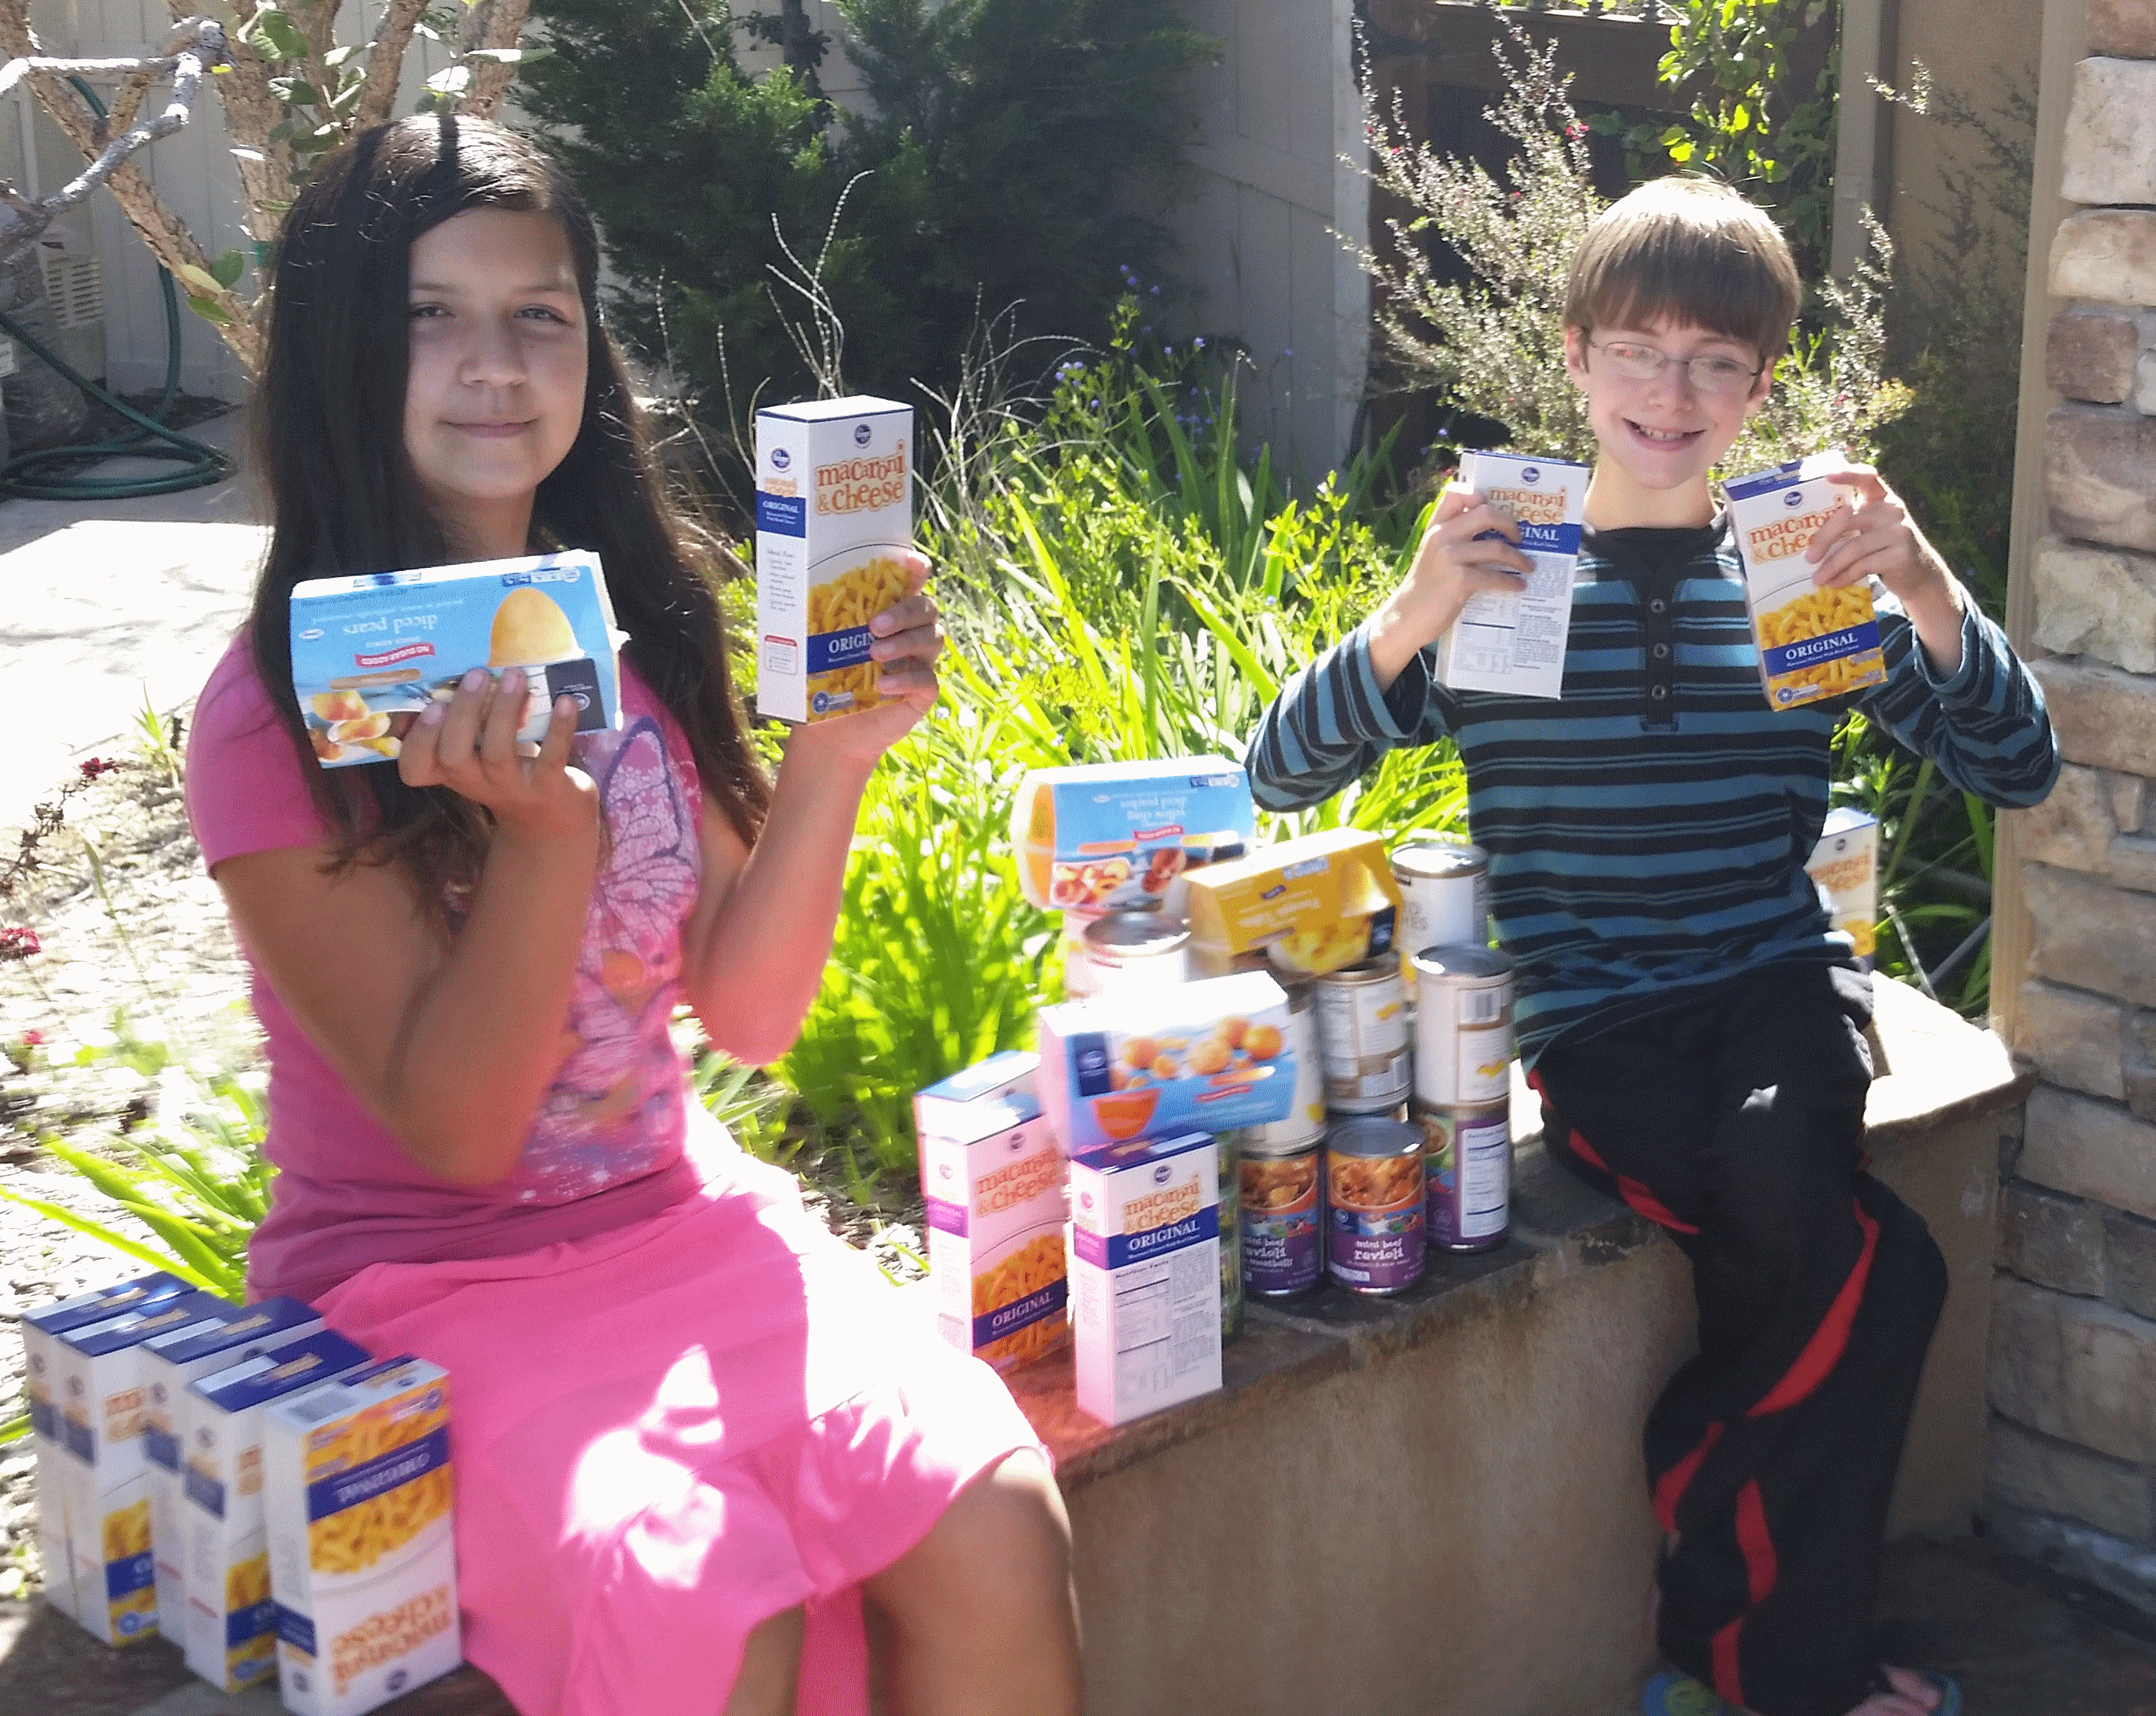 Jared and his sister Destiny collect food for Got Your Back San Diego. Jared has a strong sense of fairness, which experts attribute to some forms of autism.